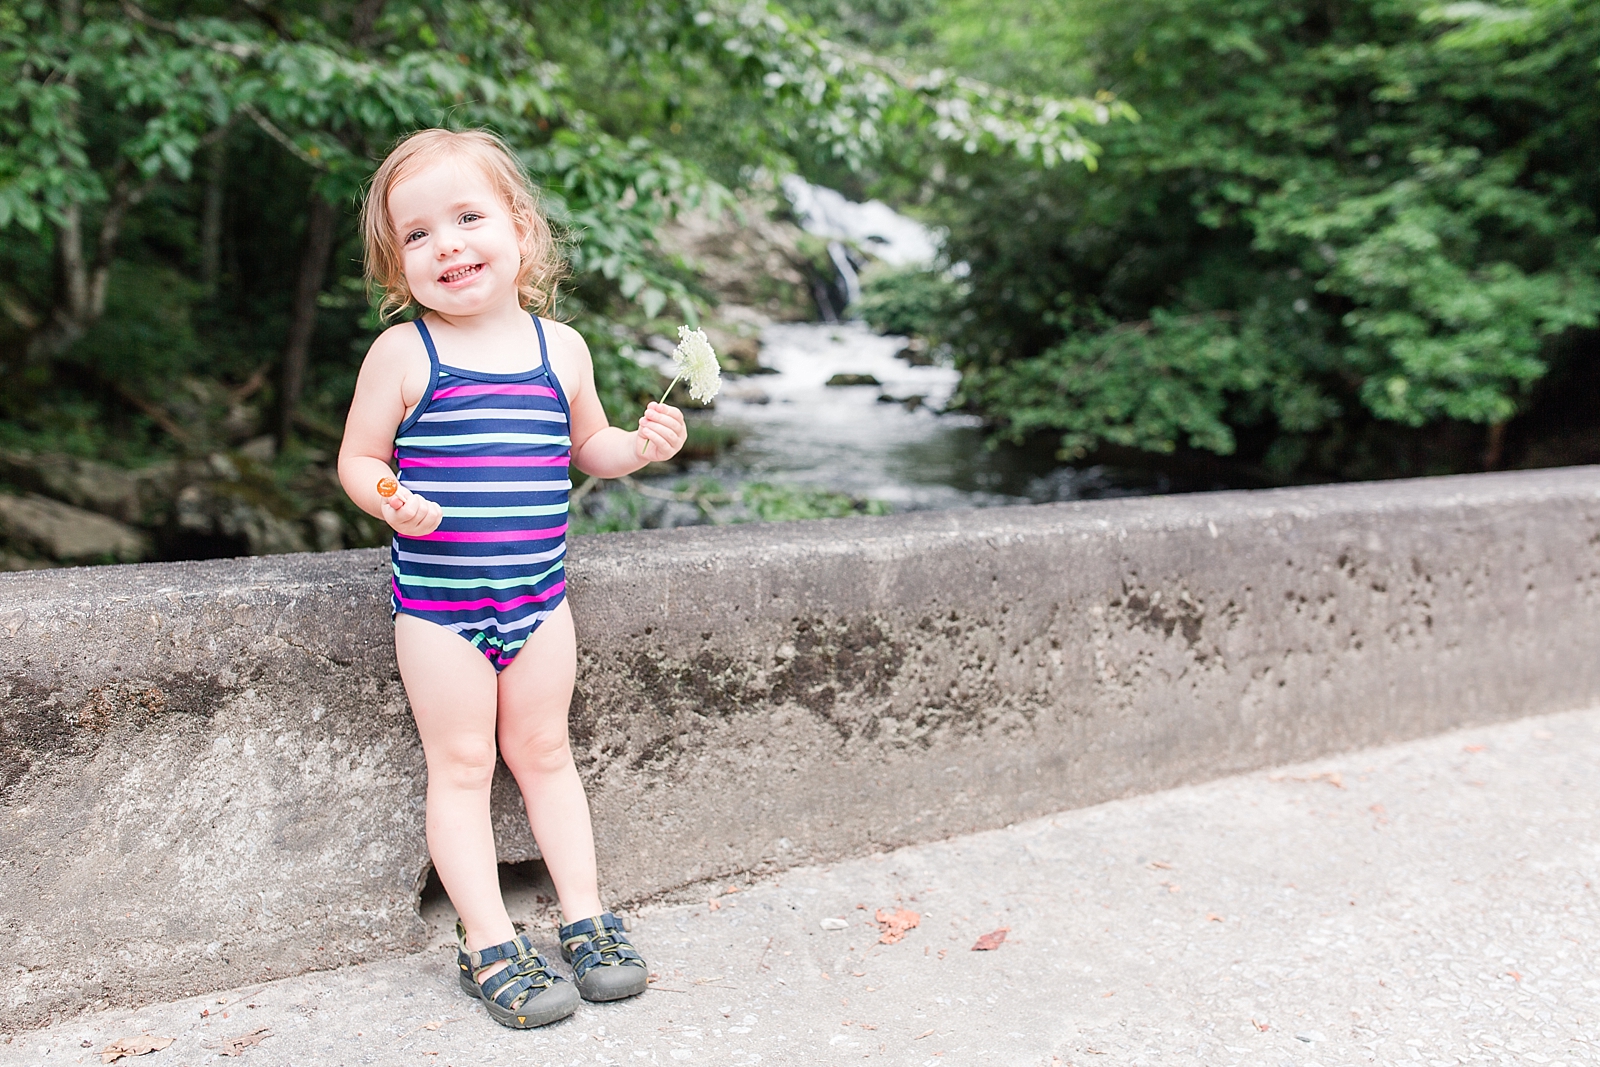 Nantahala River little girl in front of waterfall on a bridge holding a flower in her swim suit photo